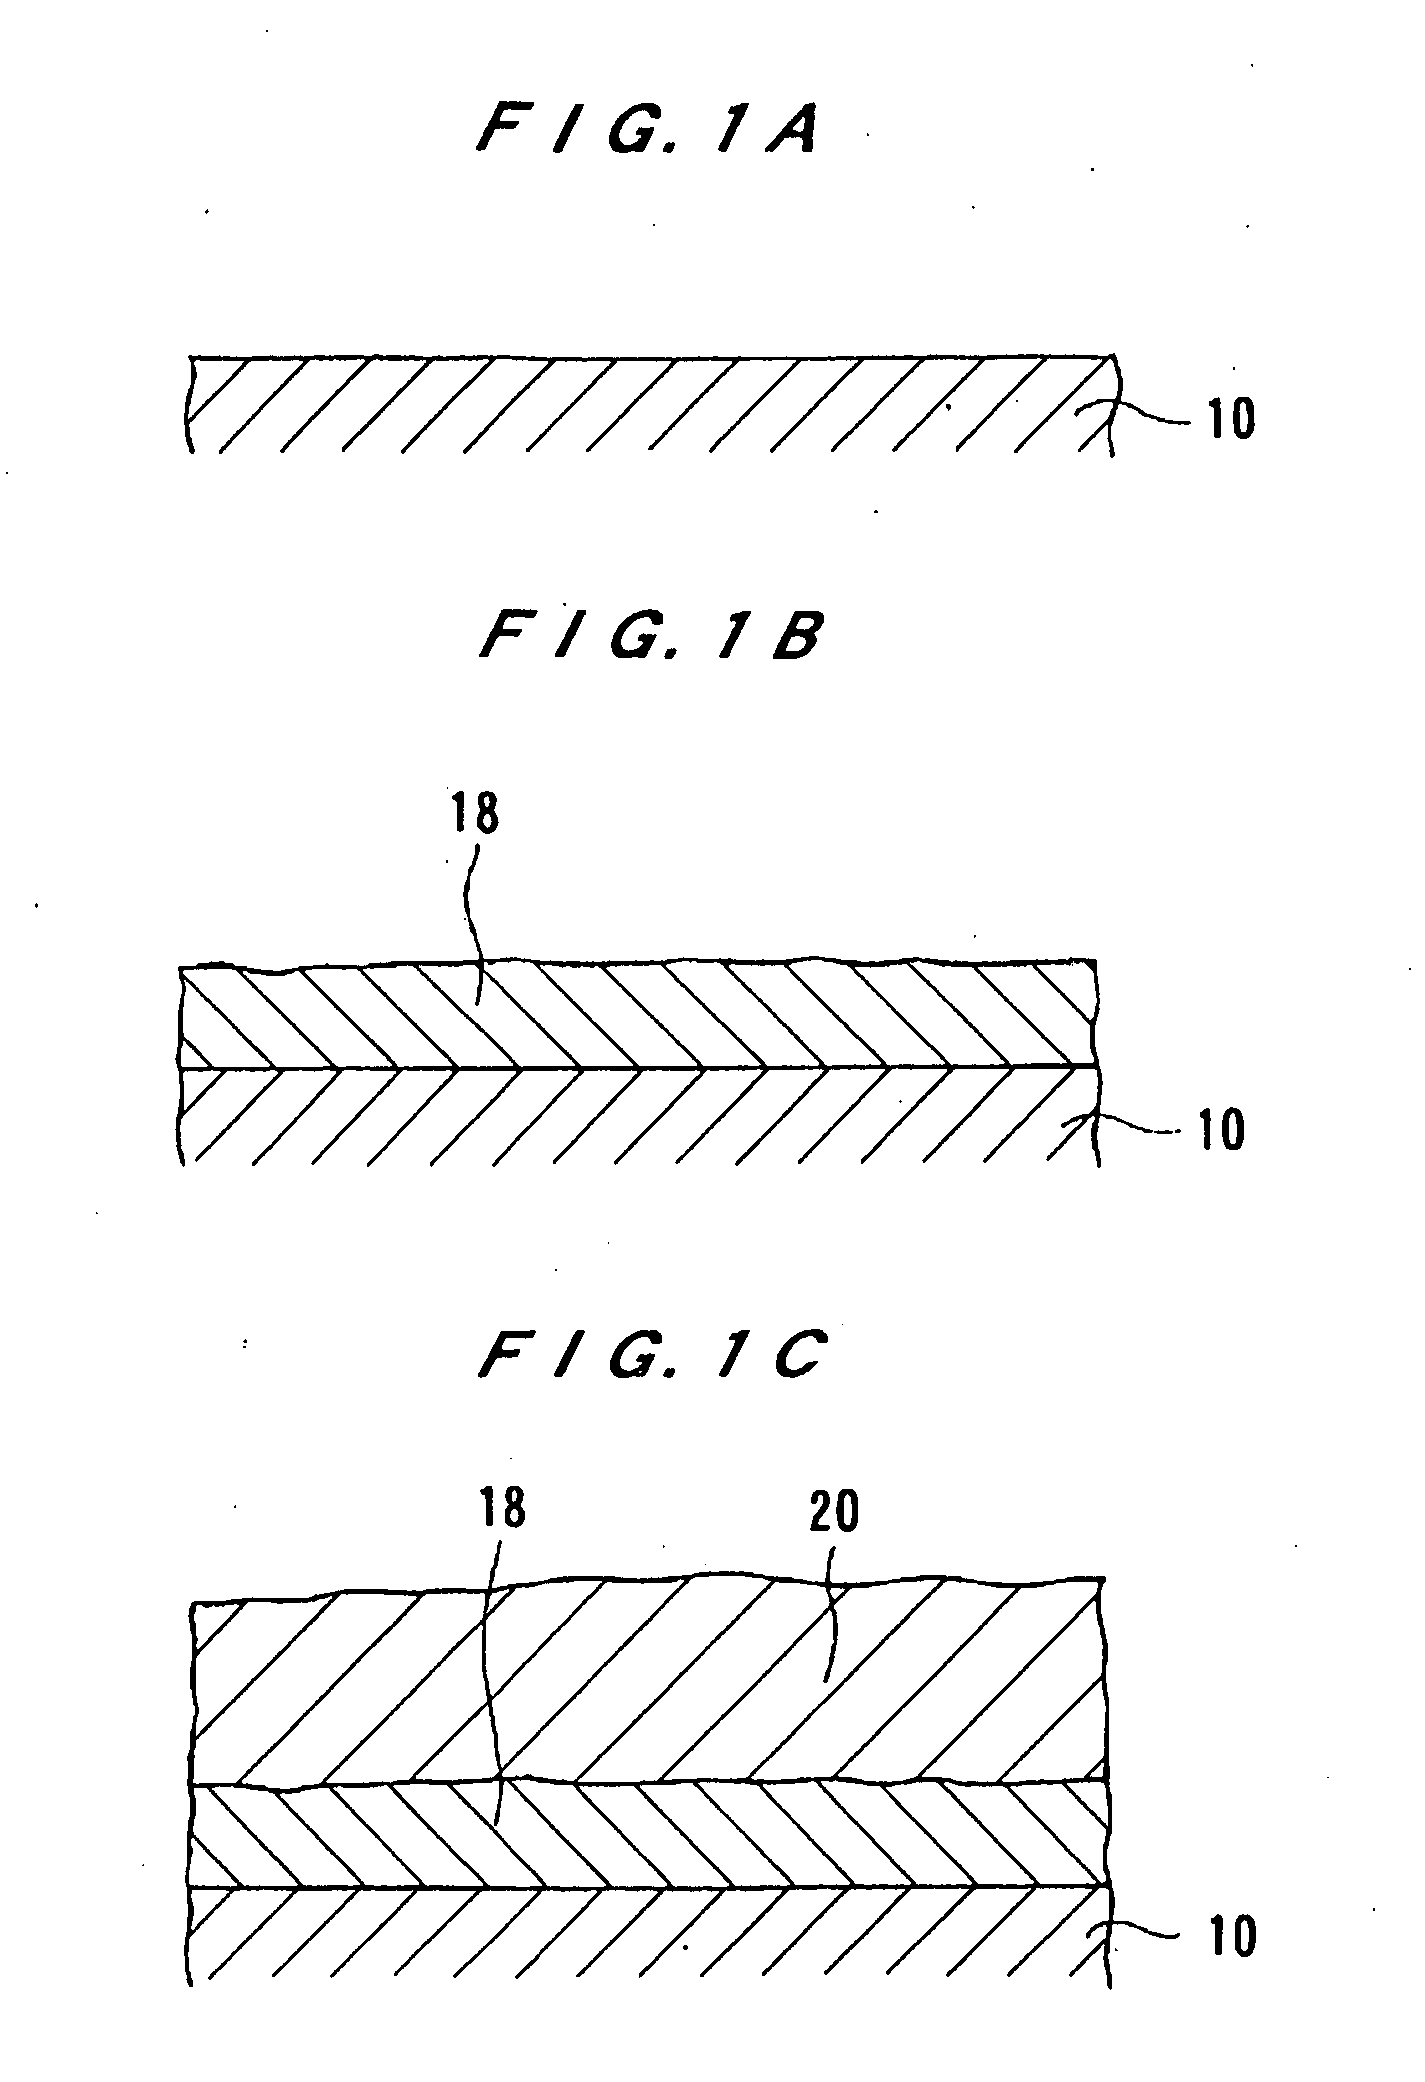 Diffusion Barrier Alloy Film, Method Of Manufacturing The Same, And High-Temperature Apparatus Member